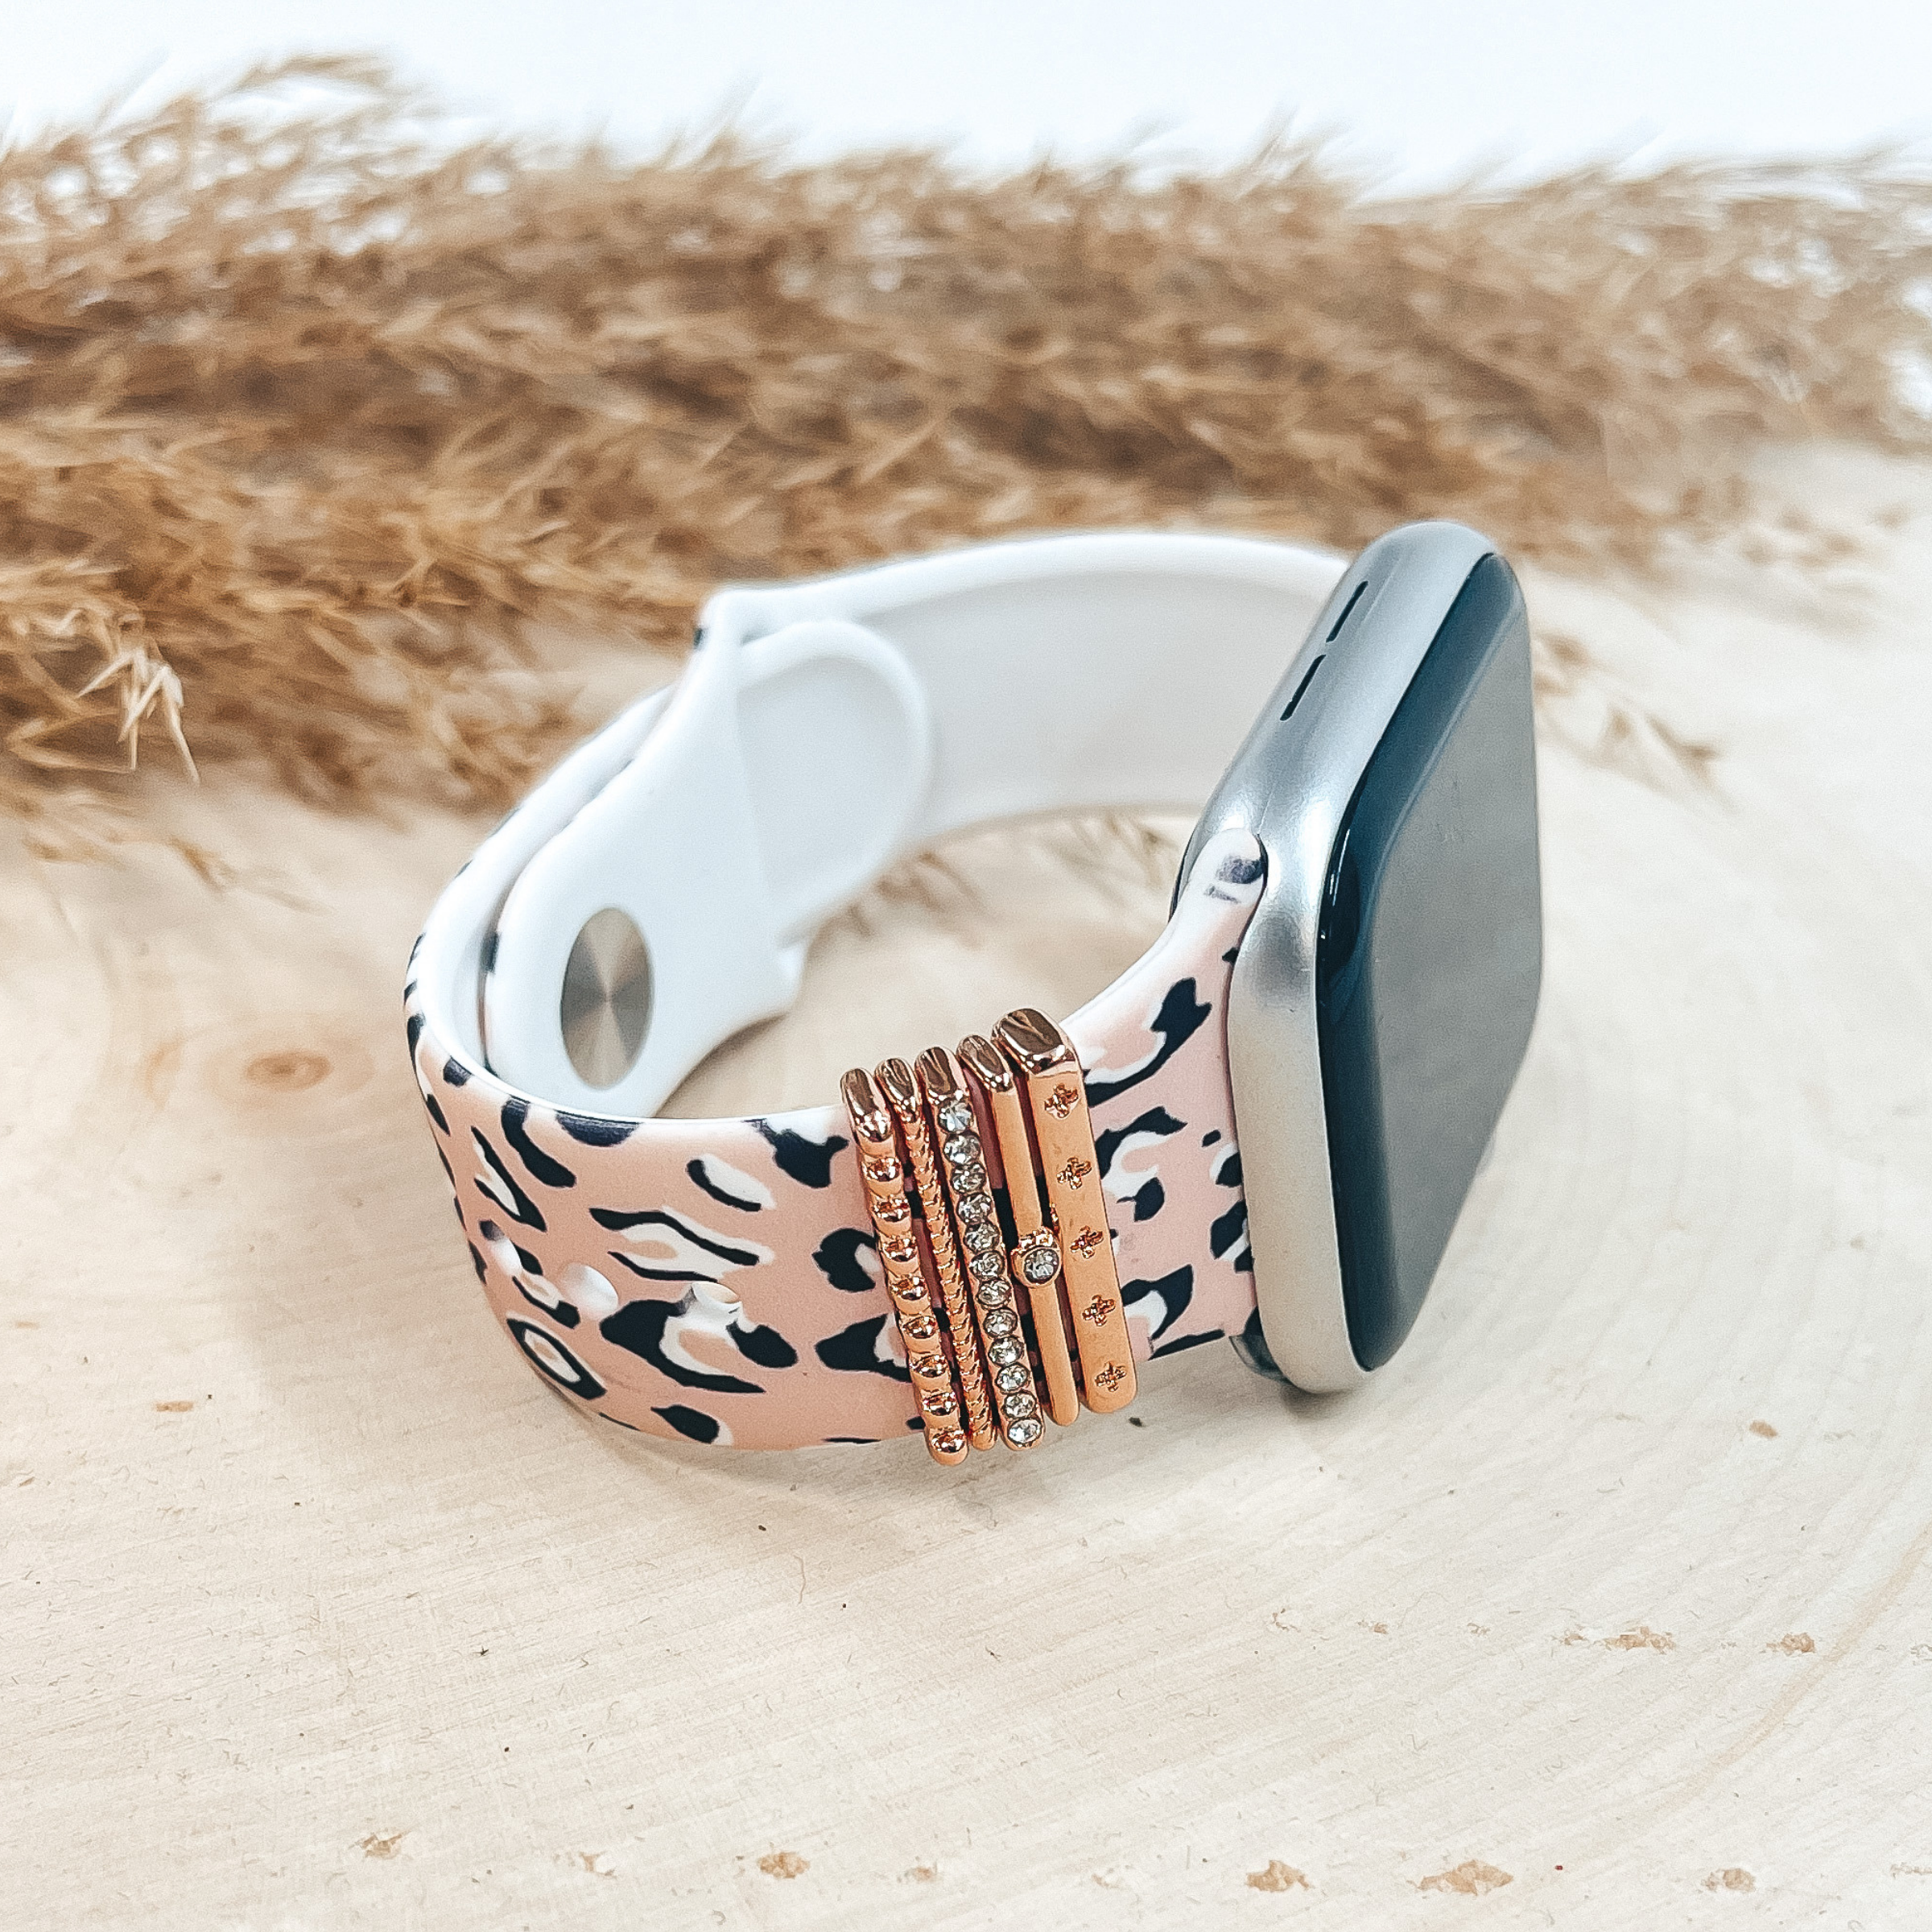 Smart Watch Band With Rose Gold Tone Crystal Set Rings with Leopard Print Design in Blush Pink